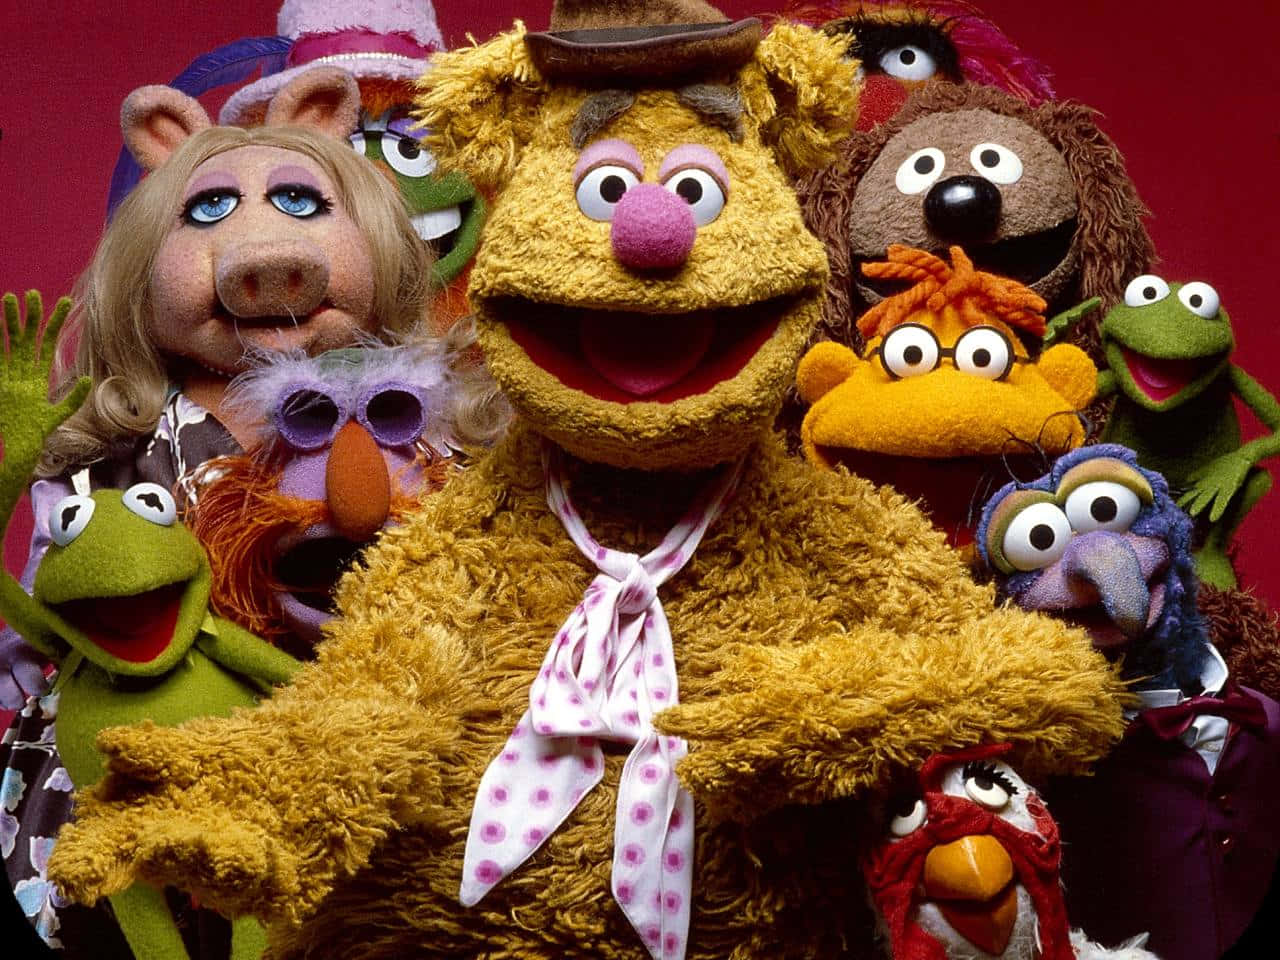 Animal Muppet brings smiles and laughter to all Wallpaper